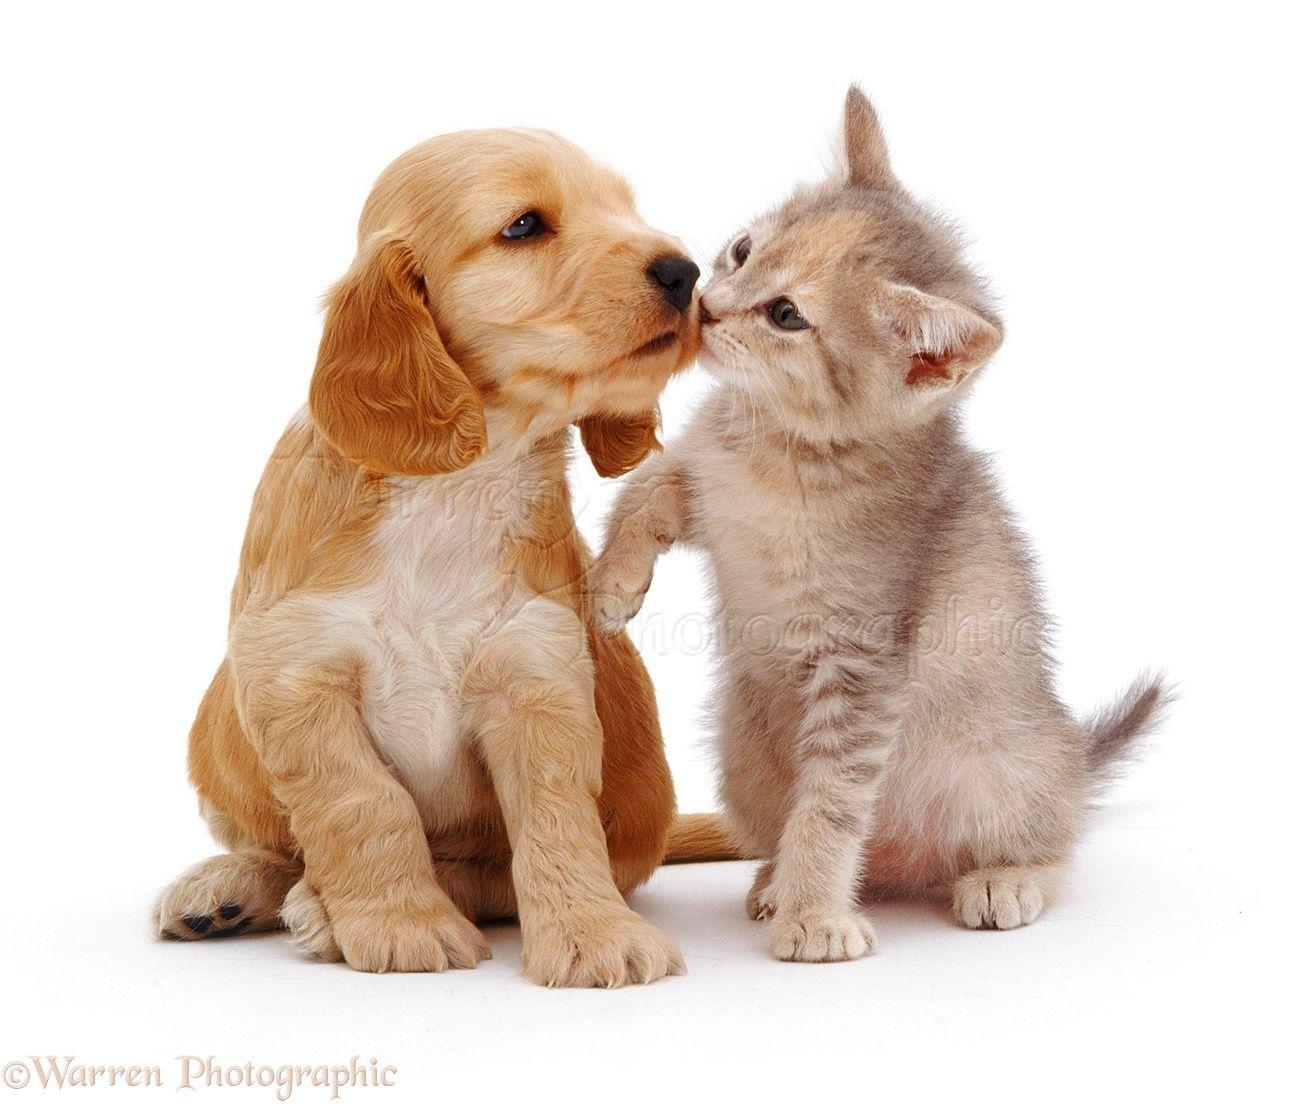 Puppies and Kittens Kissing. Cute Kittens And Puppies